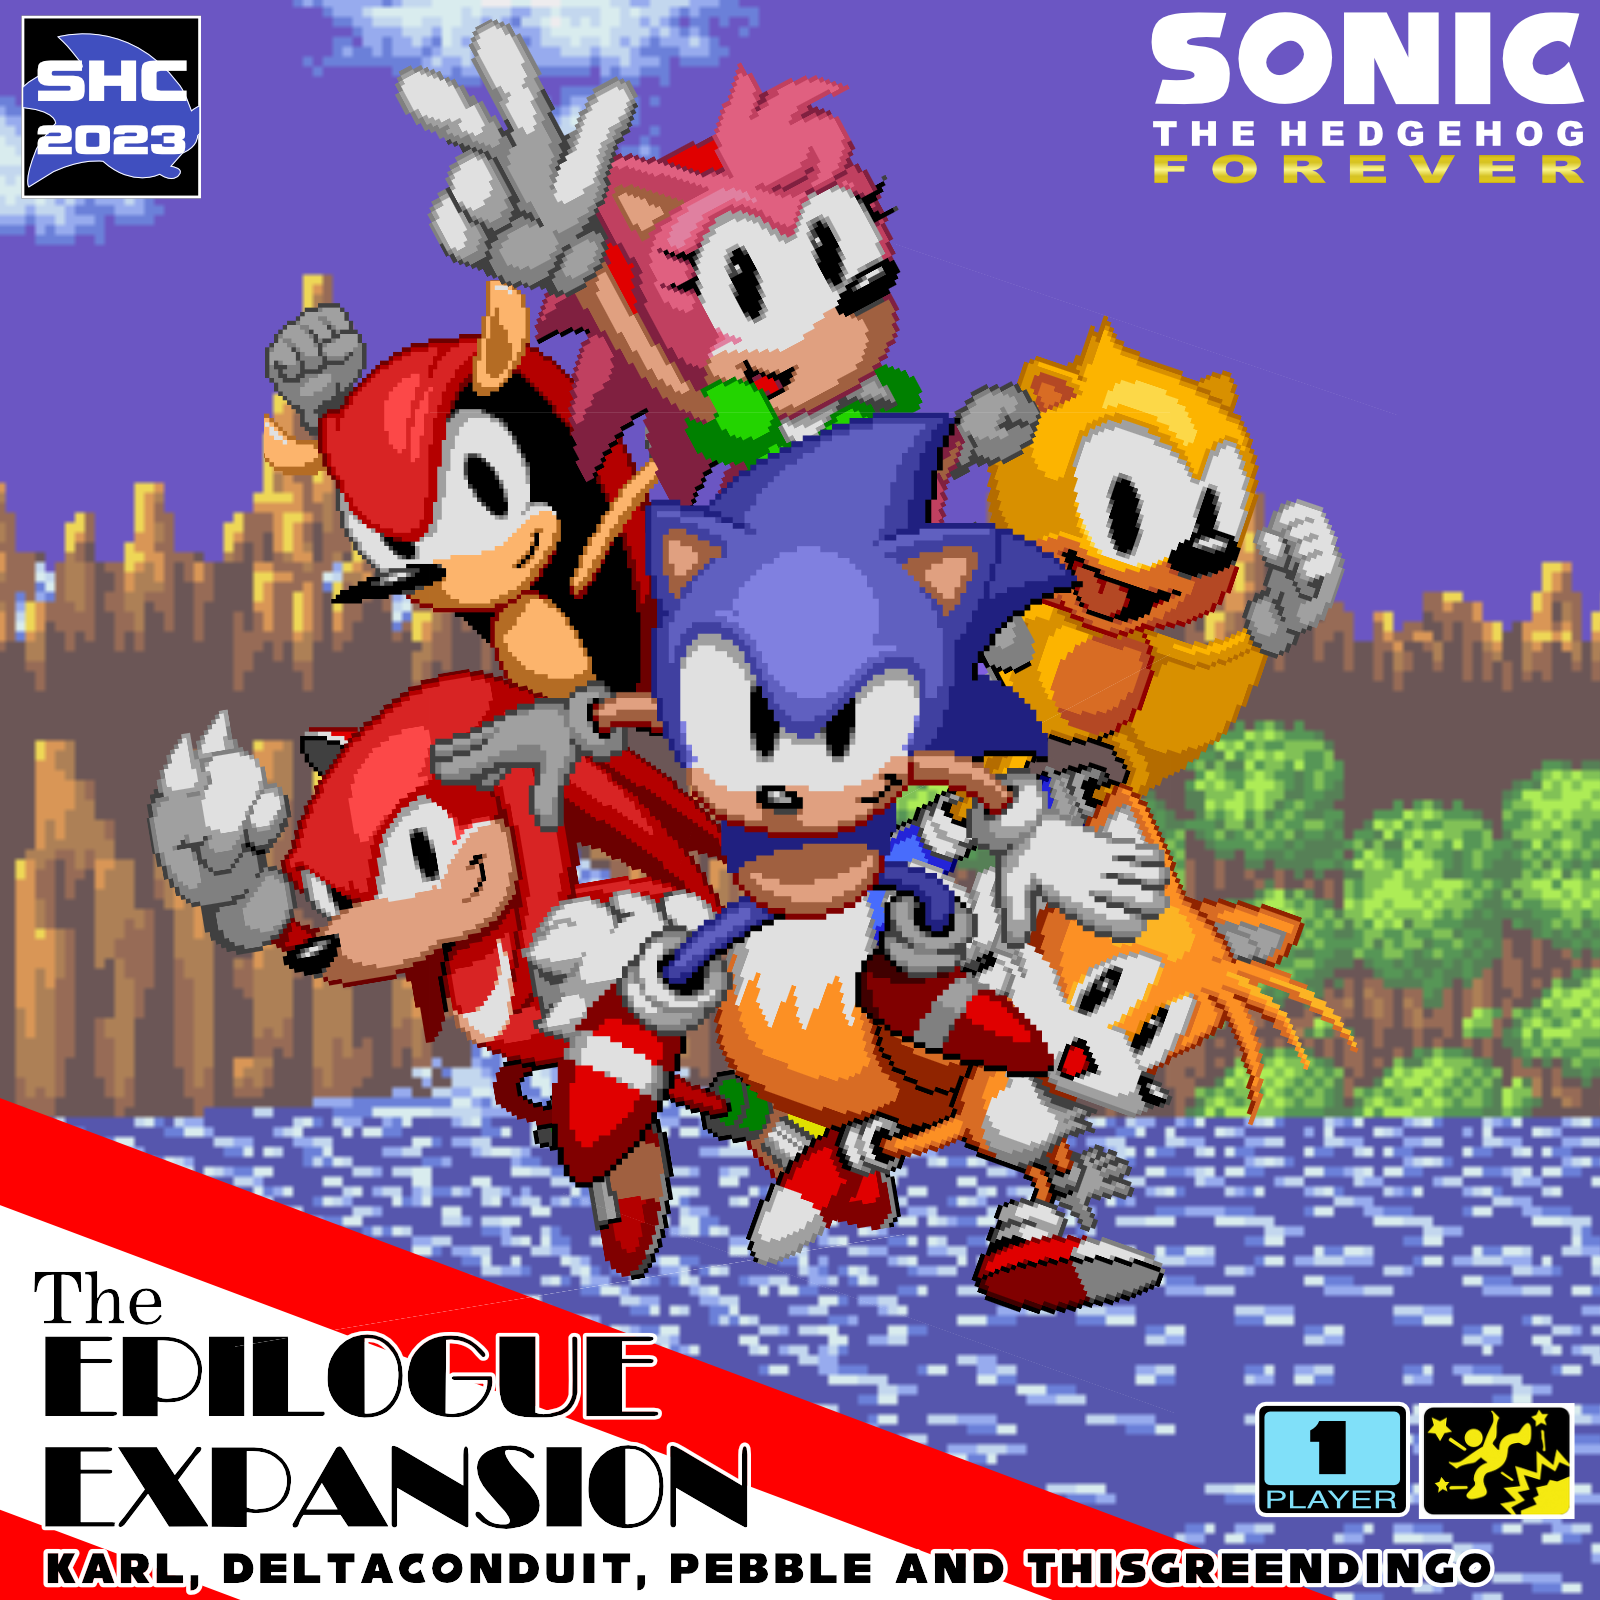 Sonic Hacking Contest :: The SHC2023 Expo :: Sonic Forever: The